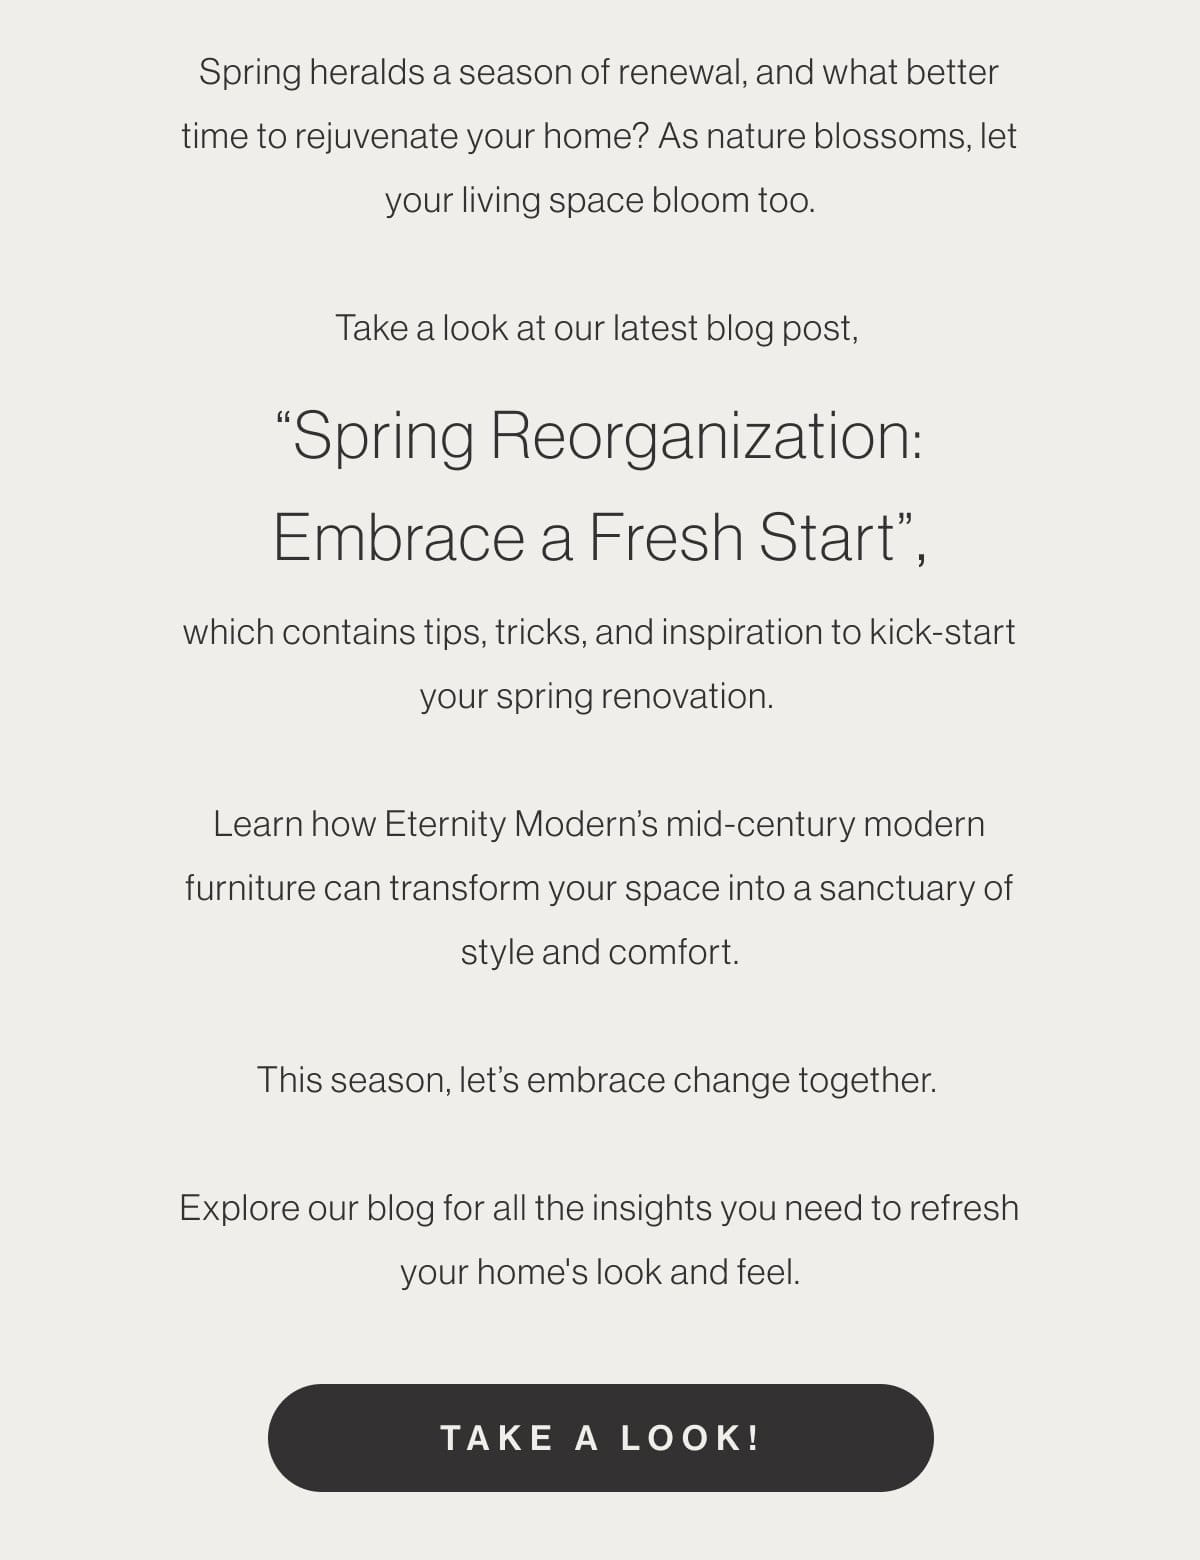 Spring heralds a season of renewal, and what better time to rejuvenate your home? As nature blossoms, let your living space bloom too. Take a look at our latest blog post, “Spring Reorganization: Embrace a Fresh Start”, which contains tips, tricks, and inspiration to kick-start your spring renovation. Learn how Eternity Modern’s mid-century modern furniture can transform your space into a sanctuary of style and comfort. This season, let’s embrace change together. Explore our blog for all the insights you need to refresh your home's look and feel. - Take A Look!